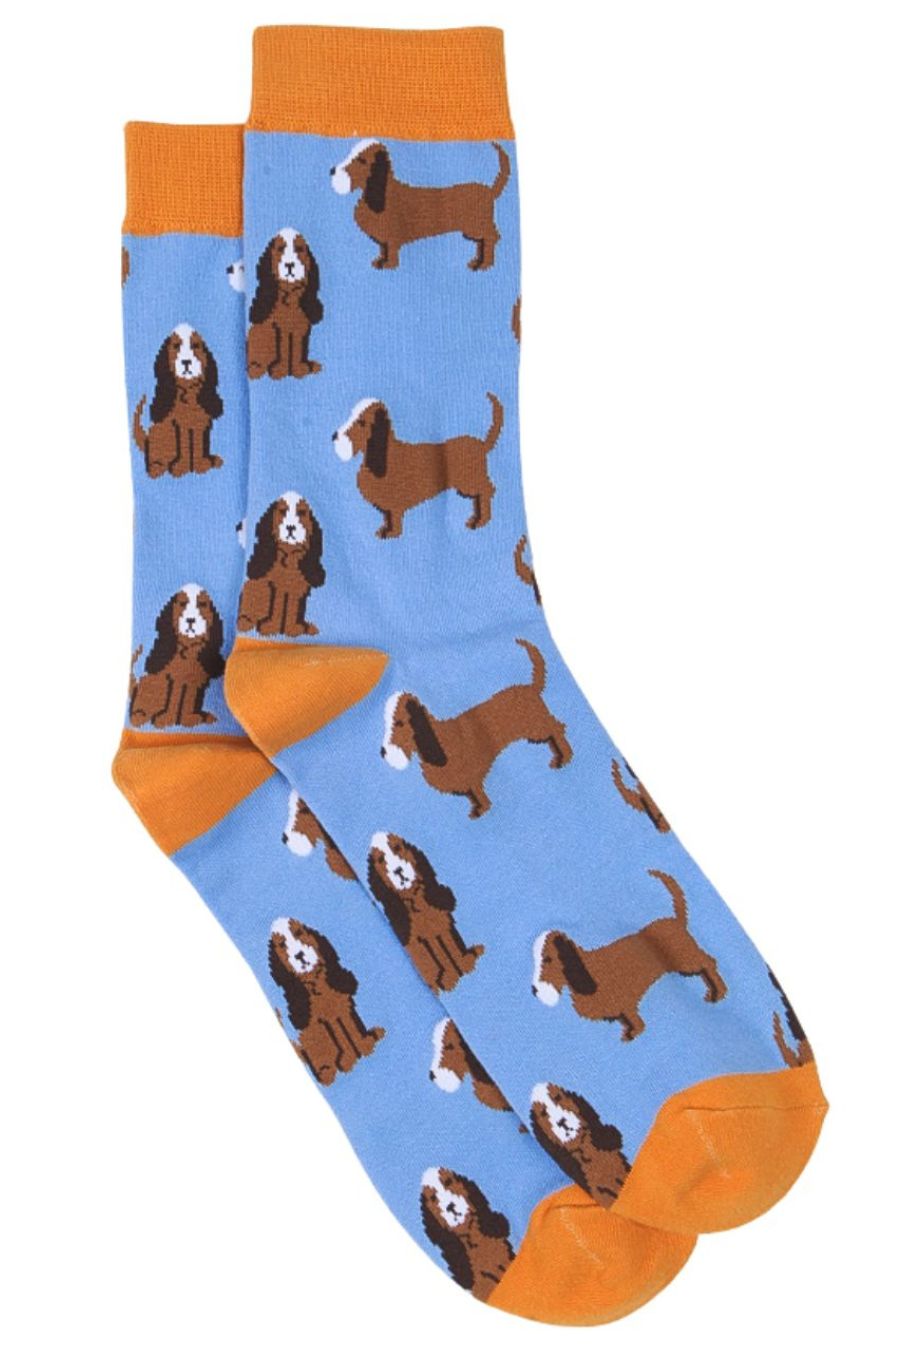 blue, yellow bamboo socks with beagle dogs all over